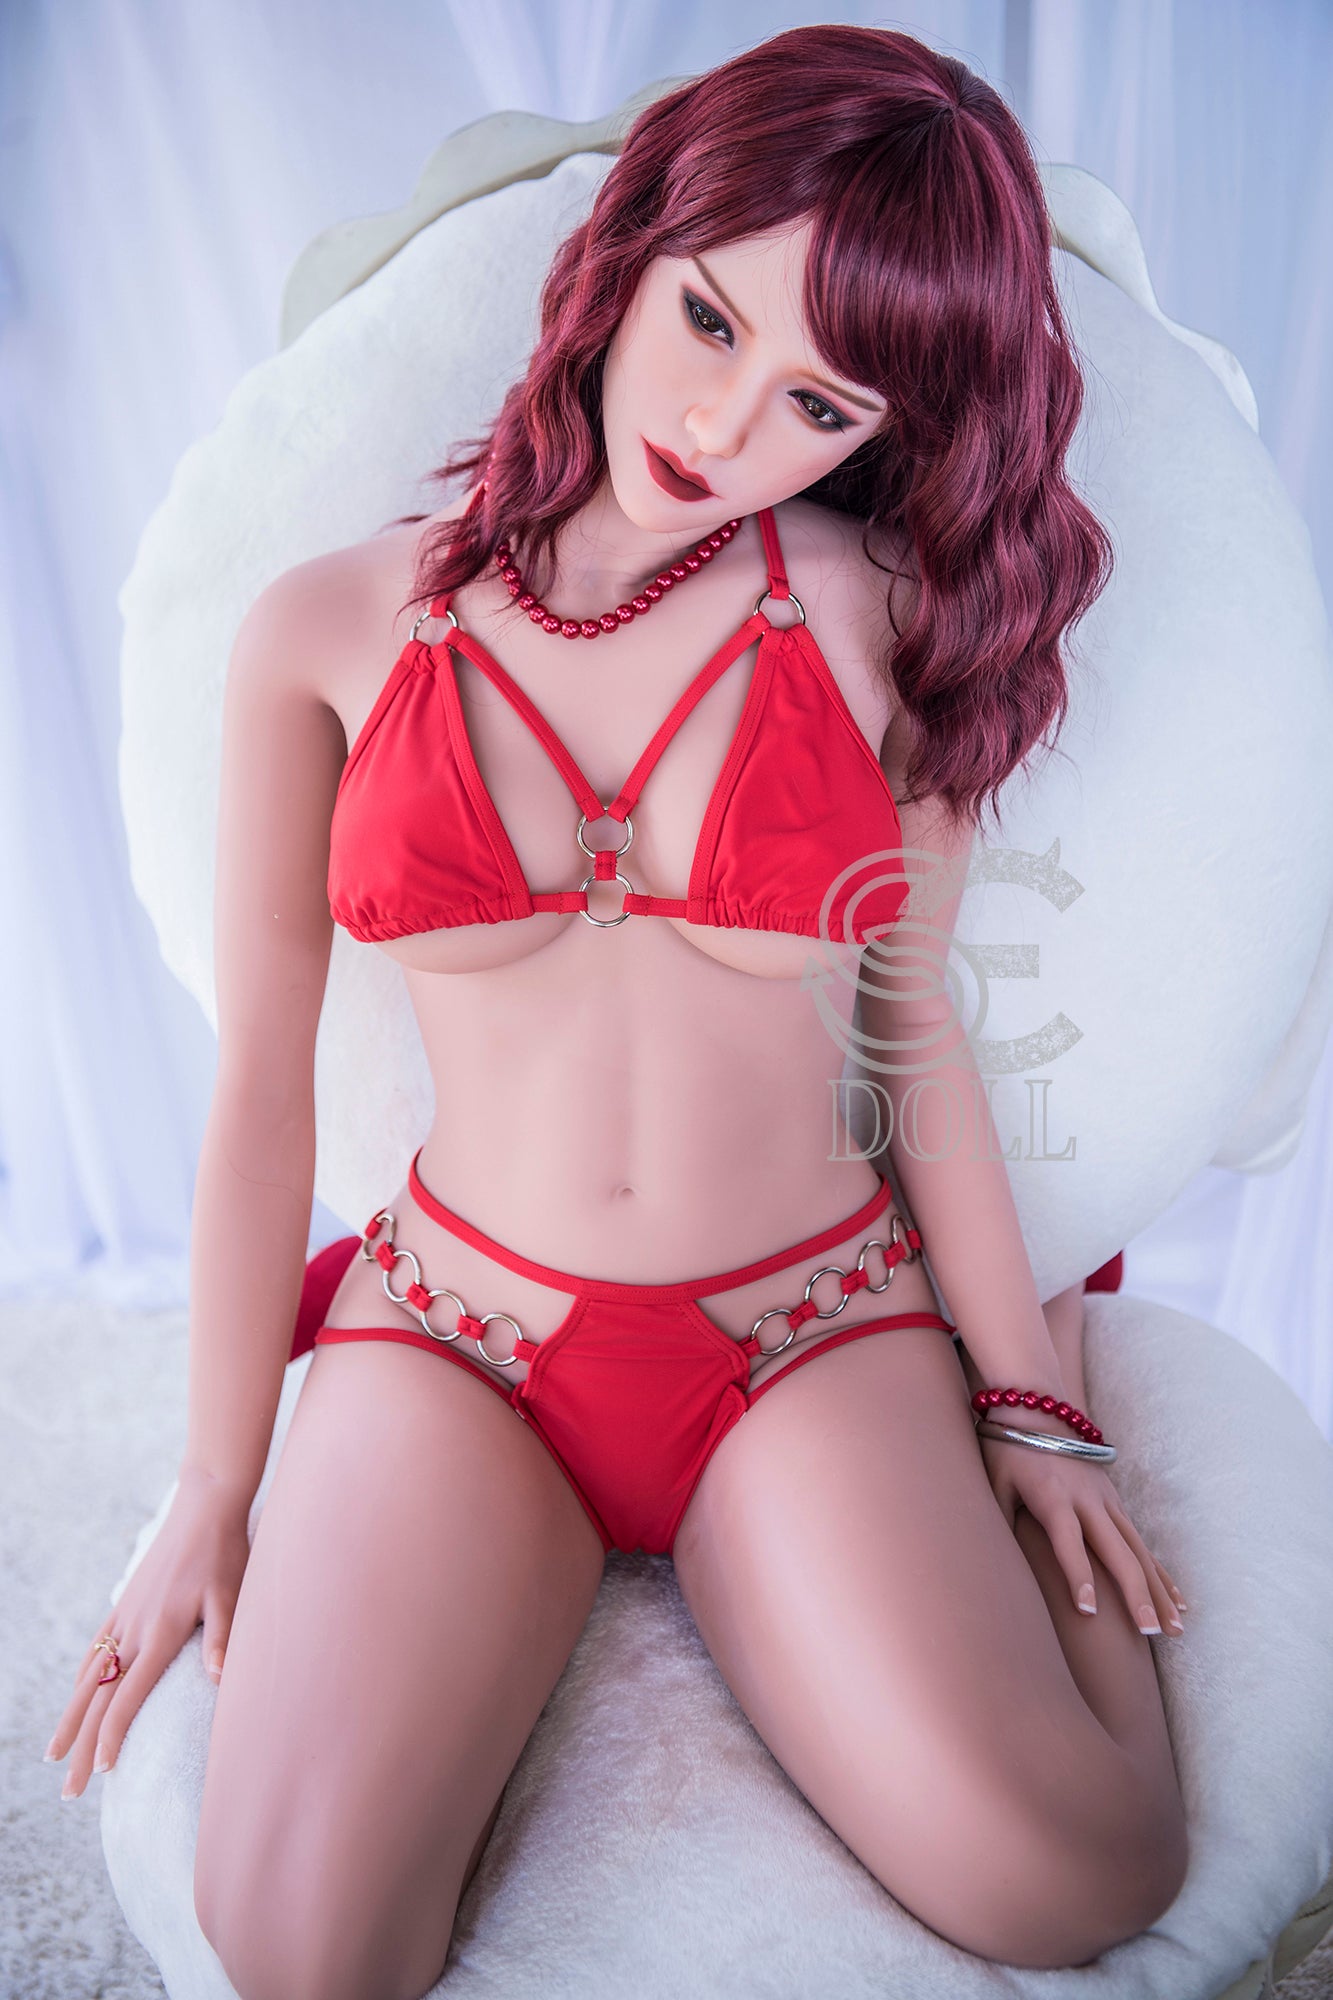 SEDOLL 163 cm E TPE - Athena | Buy Sex Dolls at DOLLS ACTUALLY